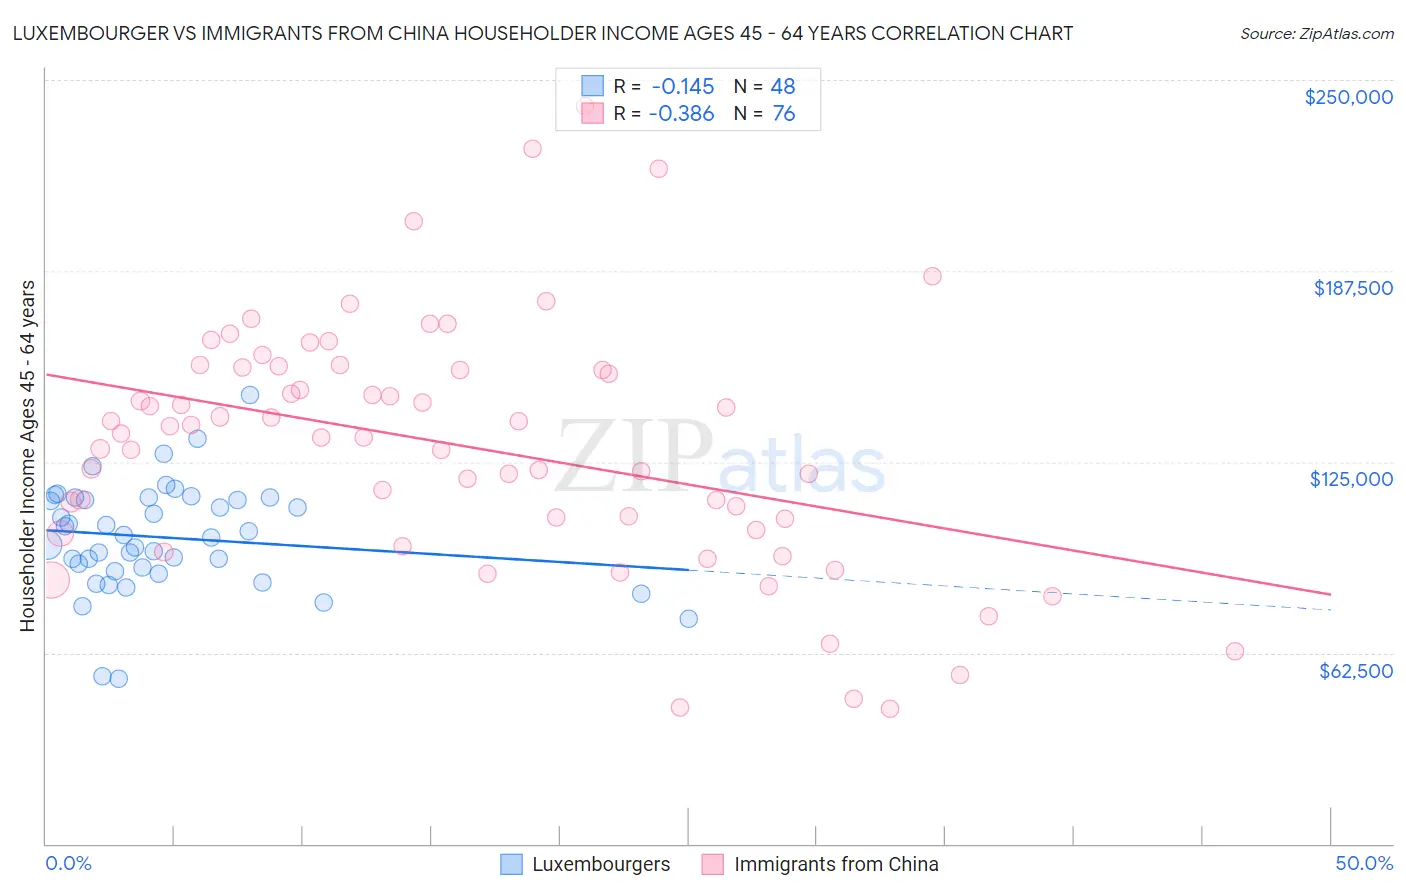 Luxembourger vs Immigrants from China Householder Income Ages 45 - 64 years